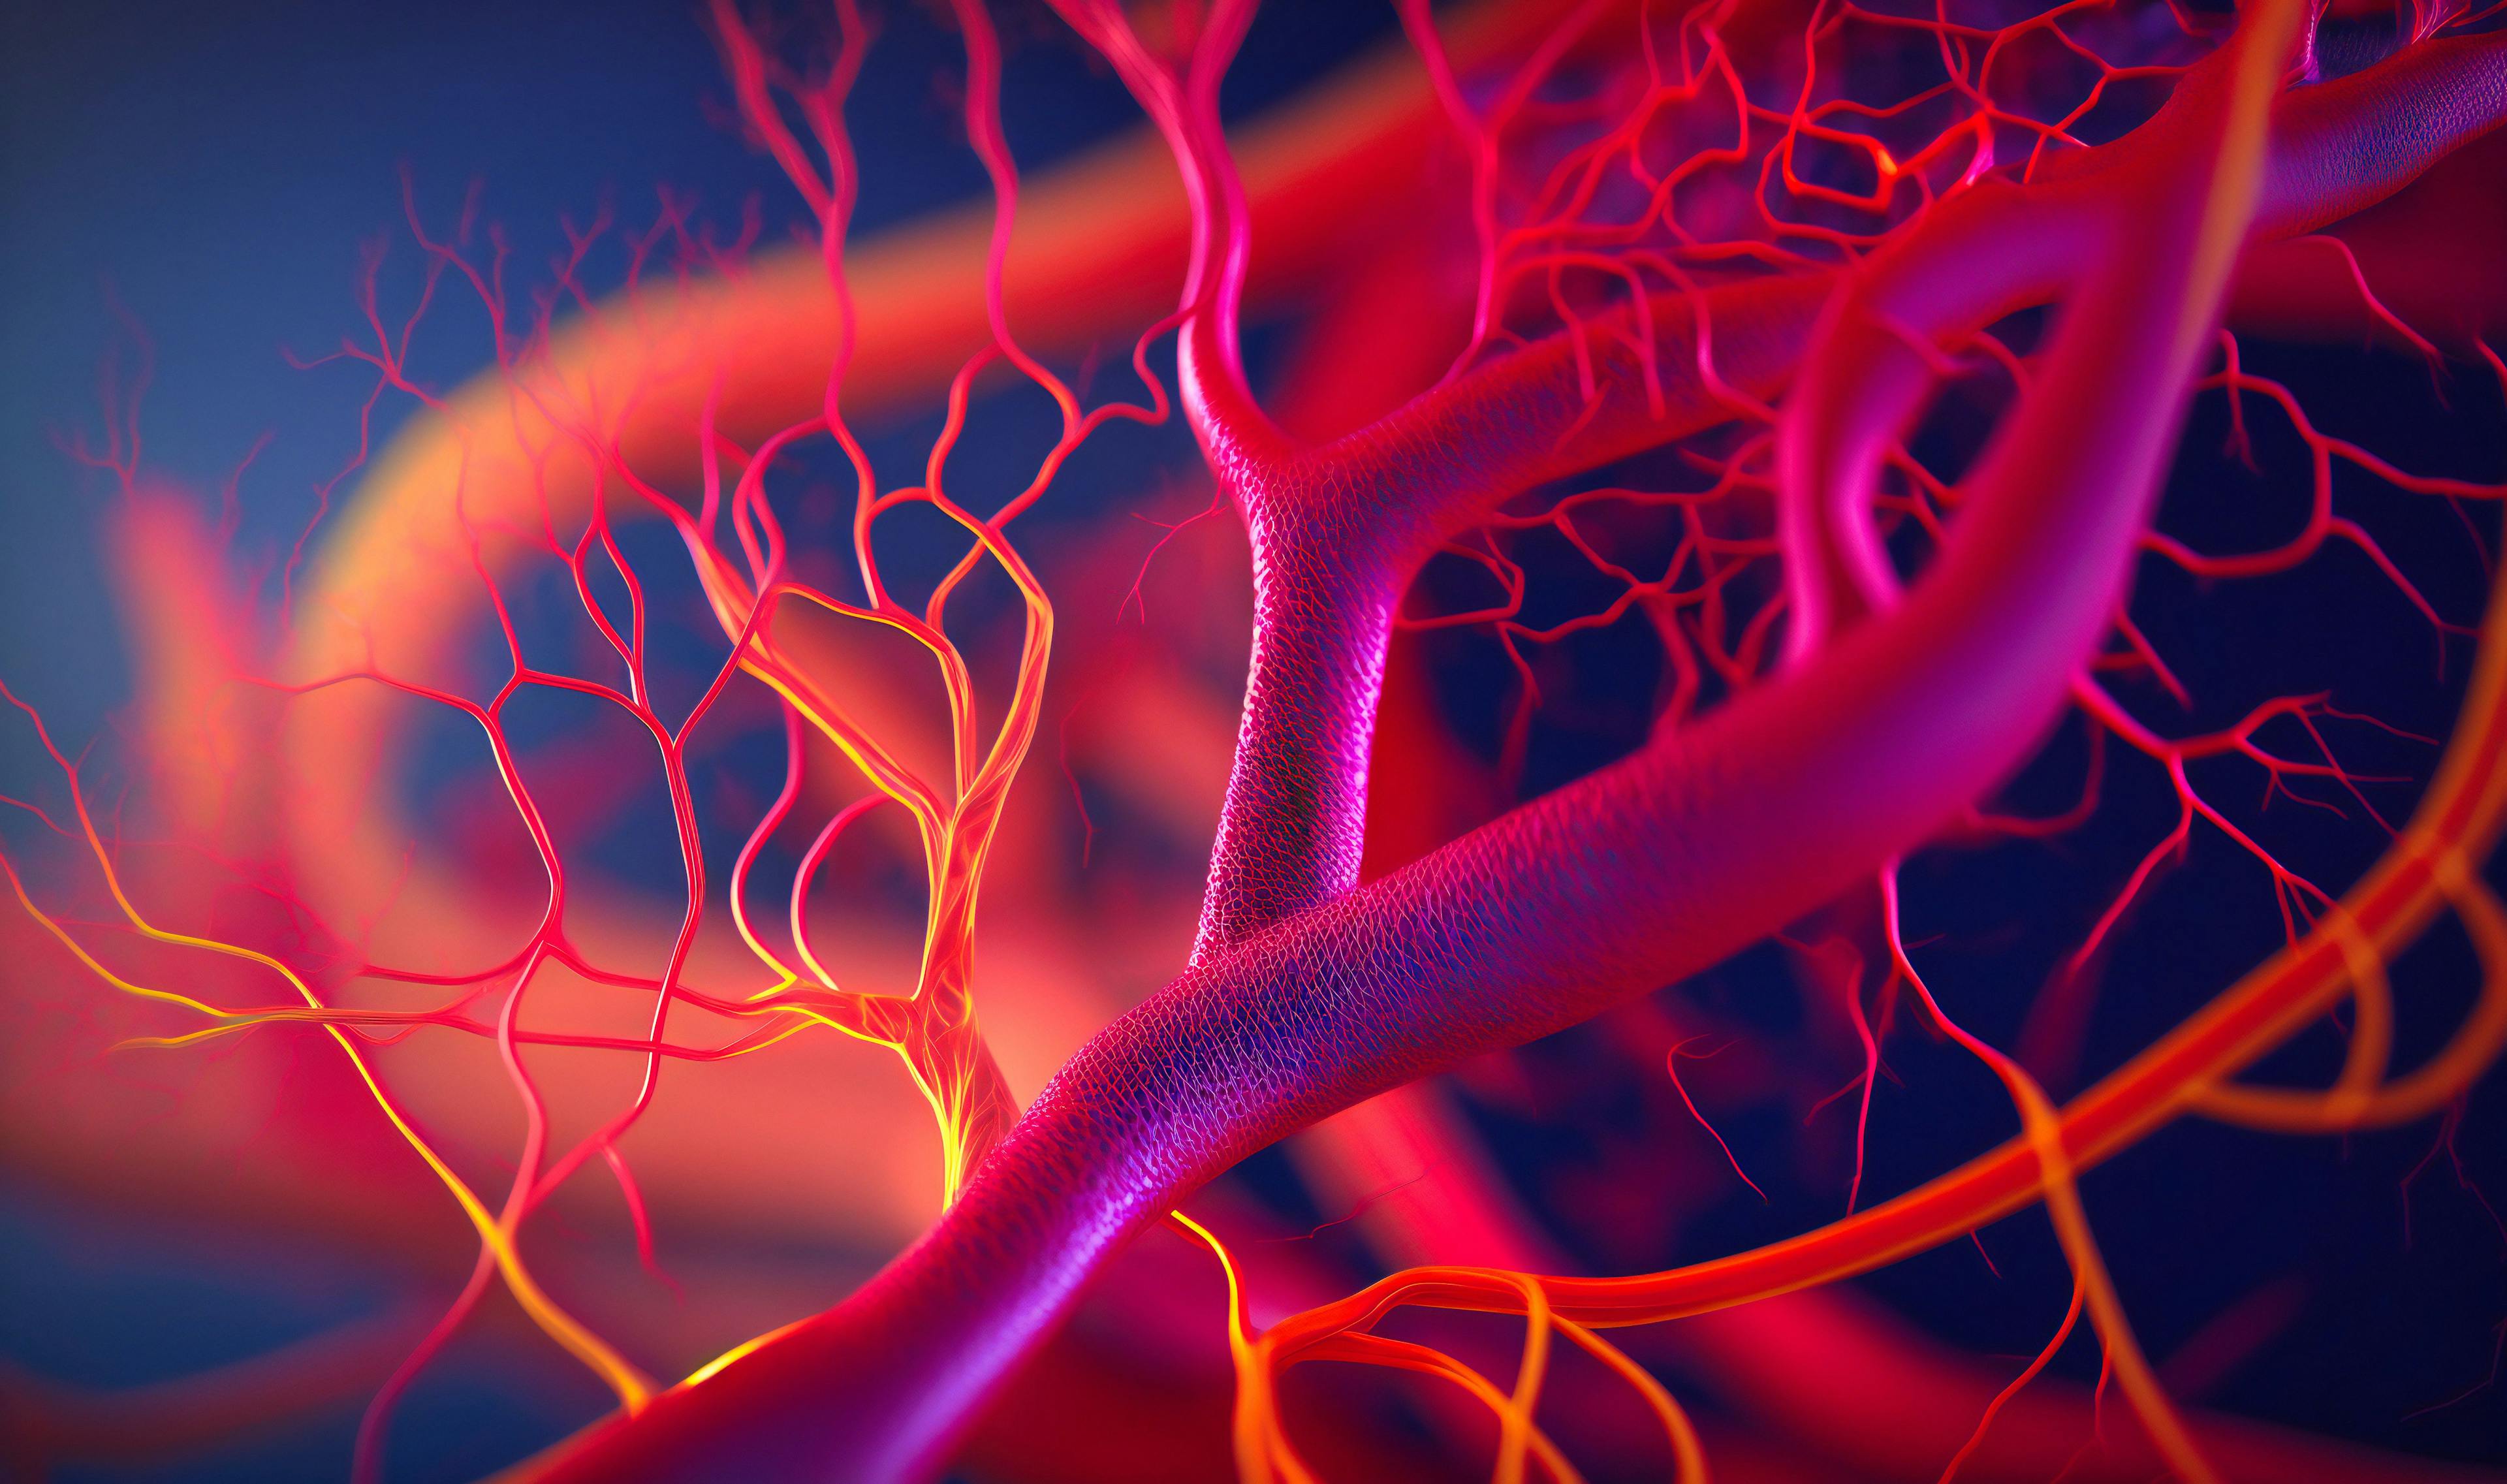 A detailed view of the complex network of blood vessels in a biological sample | Image Credit: Nilima - stock.adobe.com